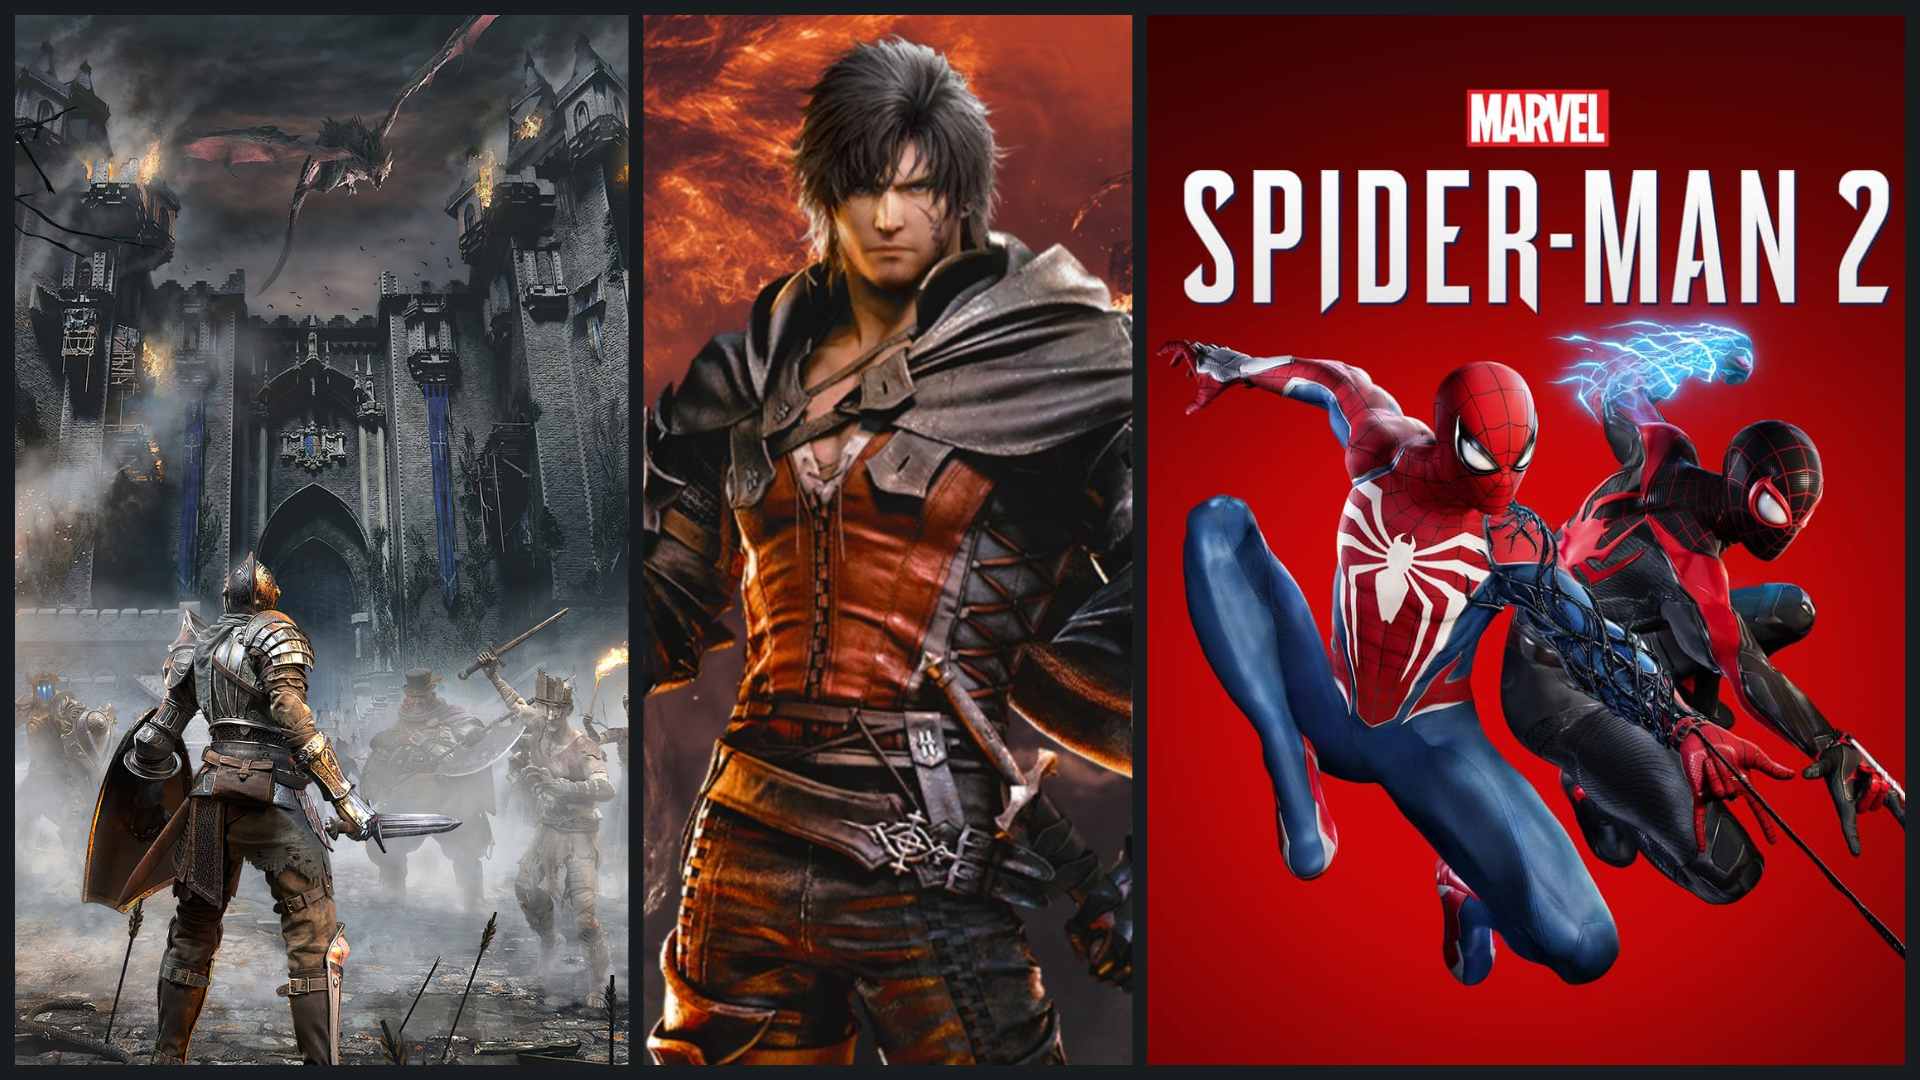 The PlayStation 5 exclusives that are currently on the market. FF16 is timed while Spider-Man 2 is set for launch in October 2023.